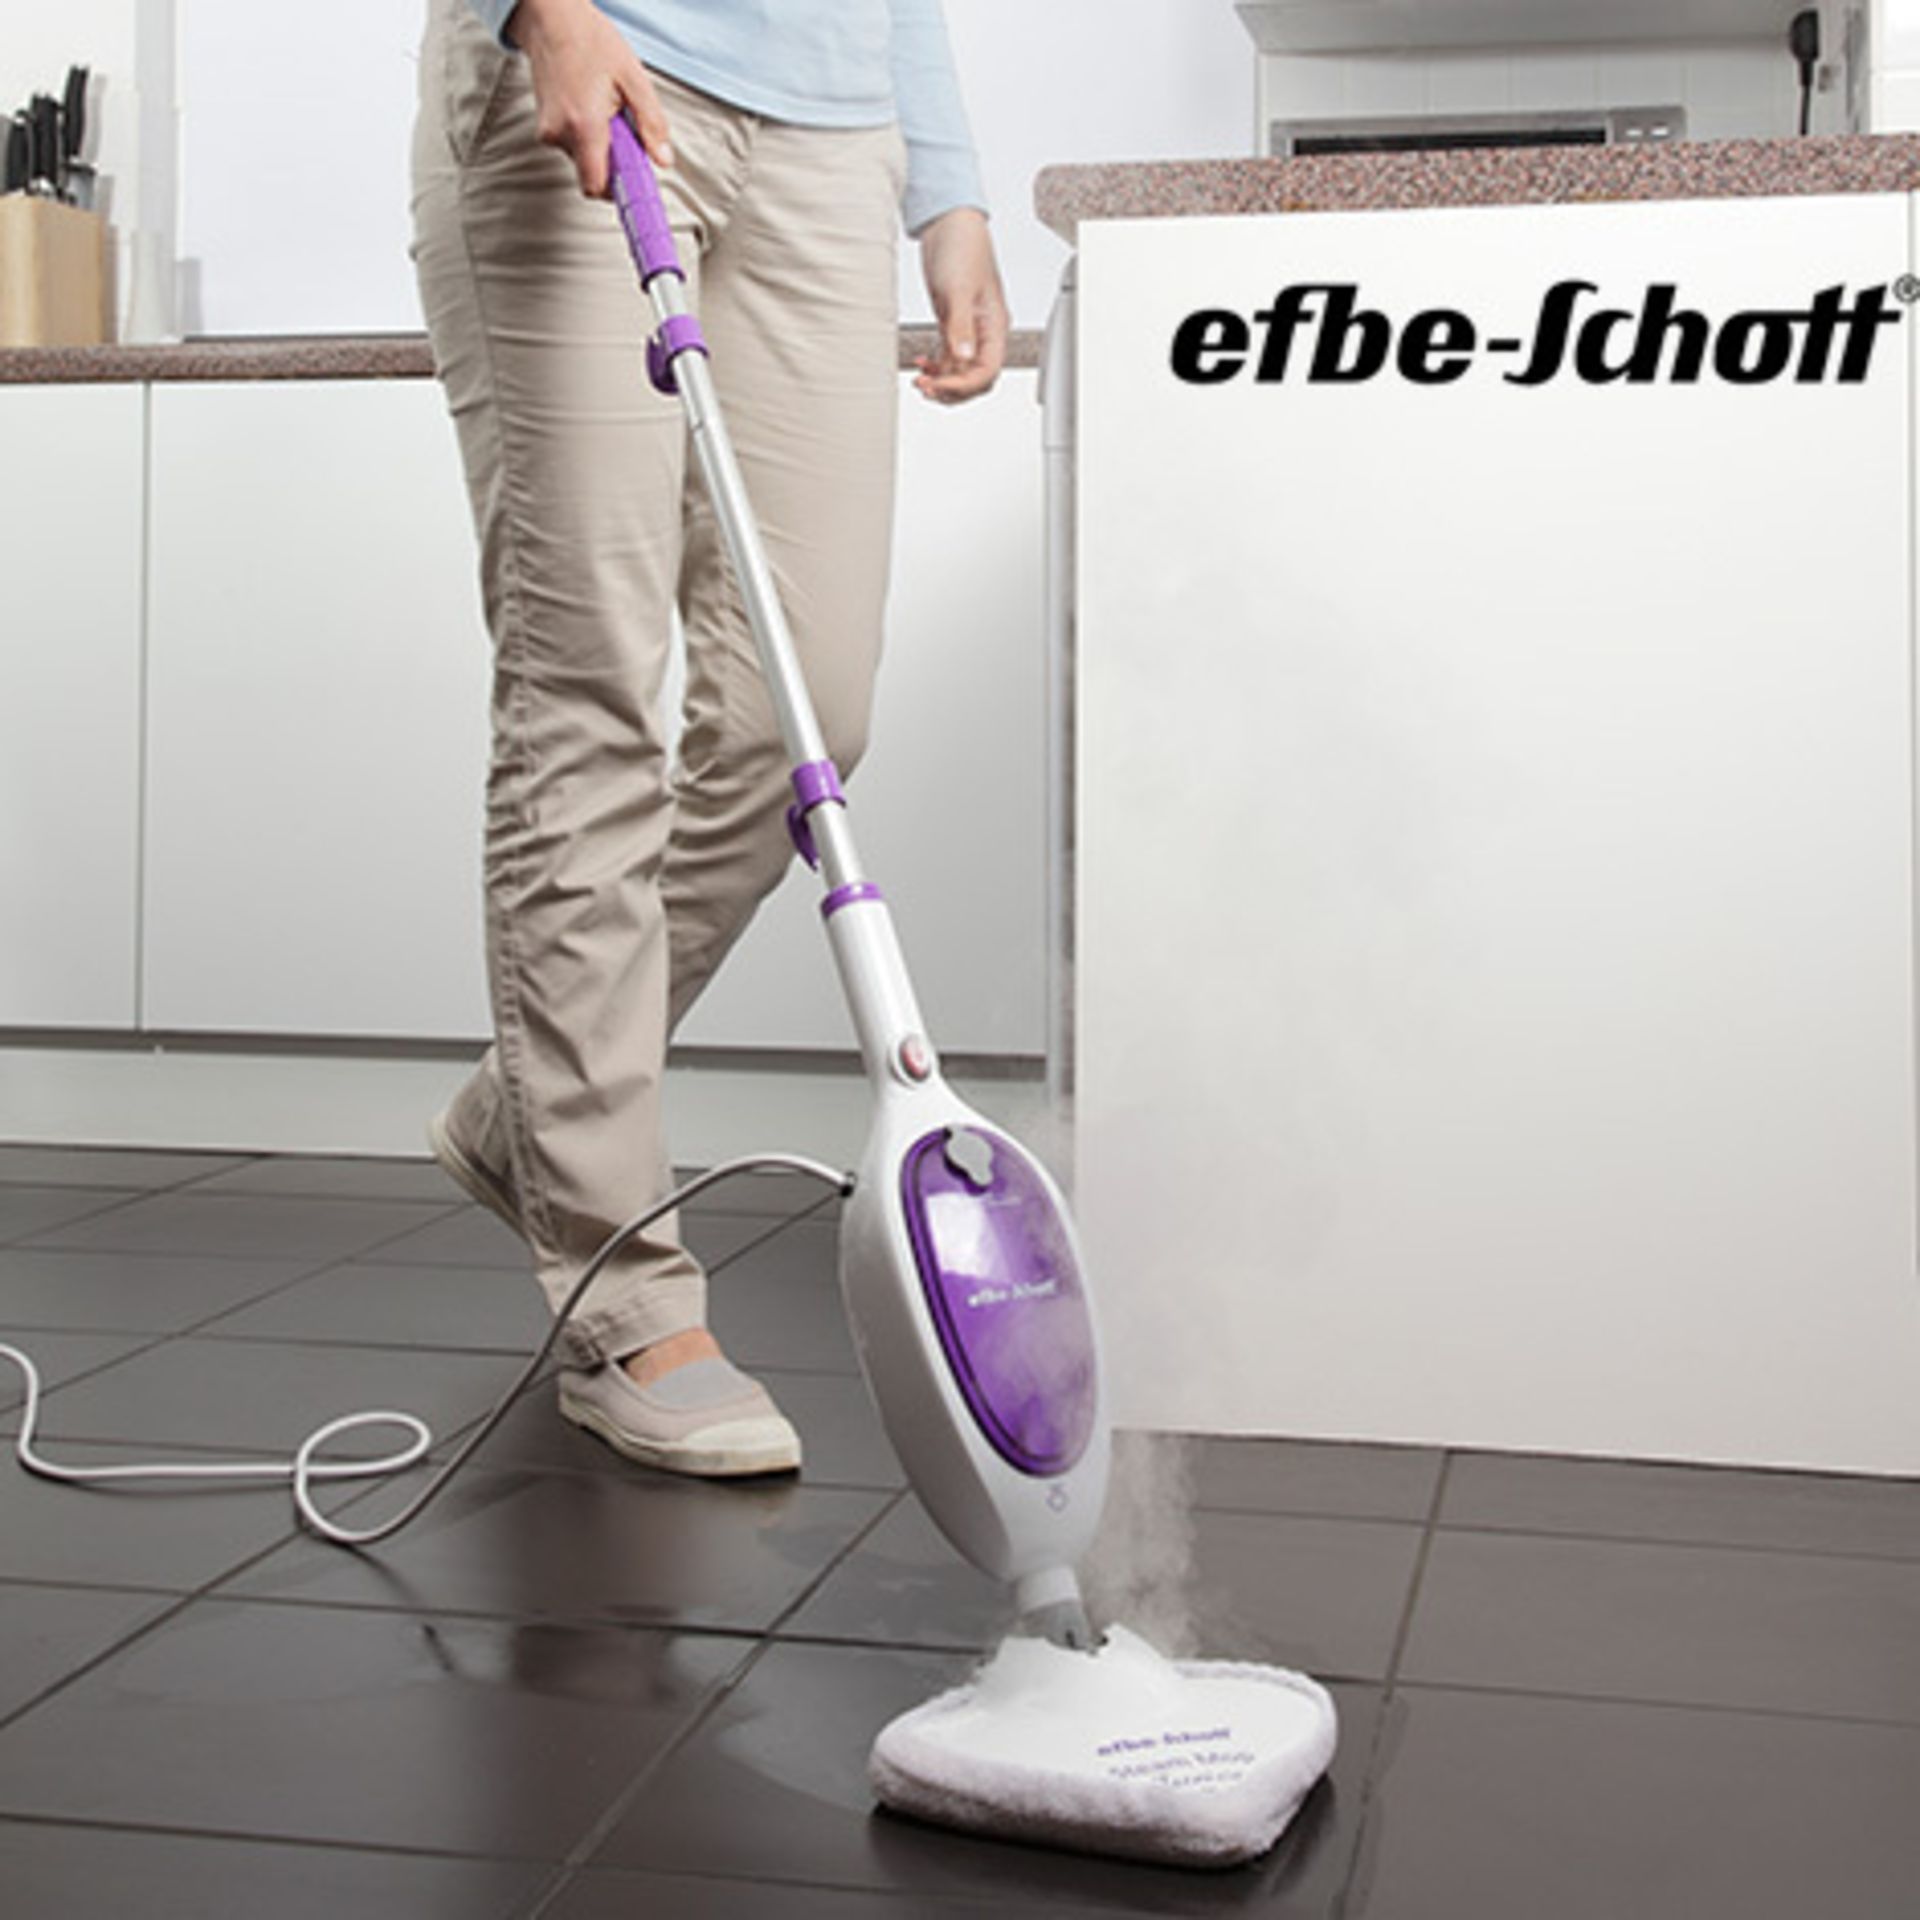 V Brand New Efbe-Schott Steam Mop (New And Boxed) Colours And Model May Vary RRP59.99 X 2 YOUR BID